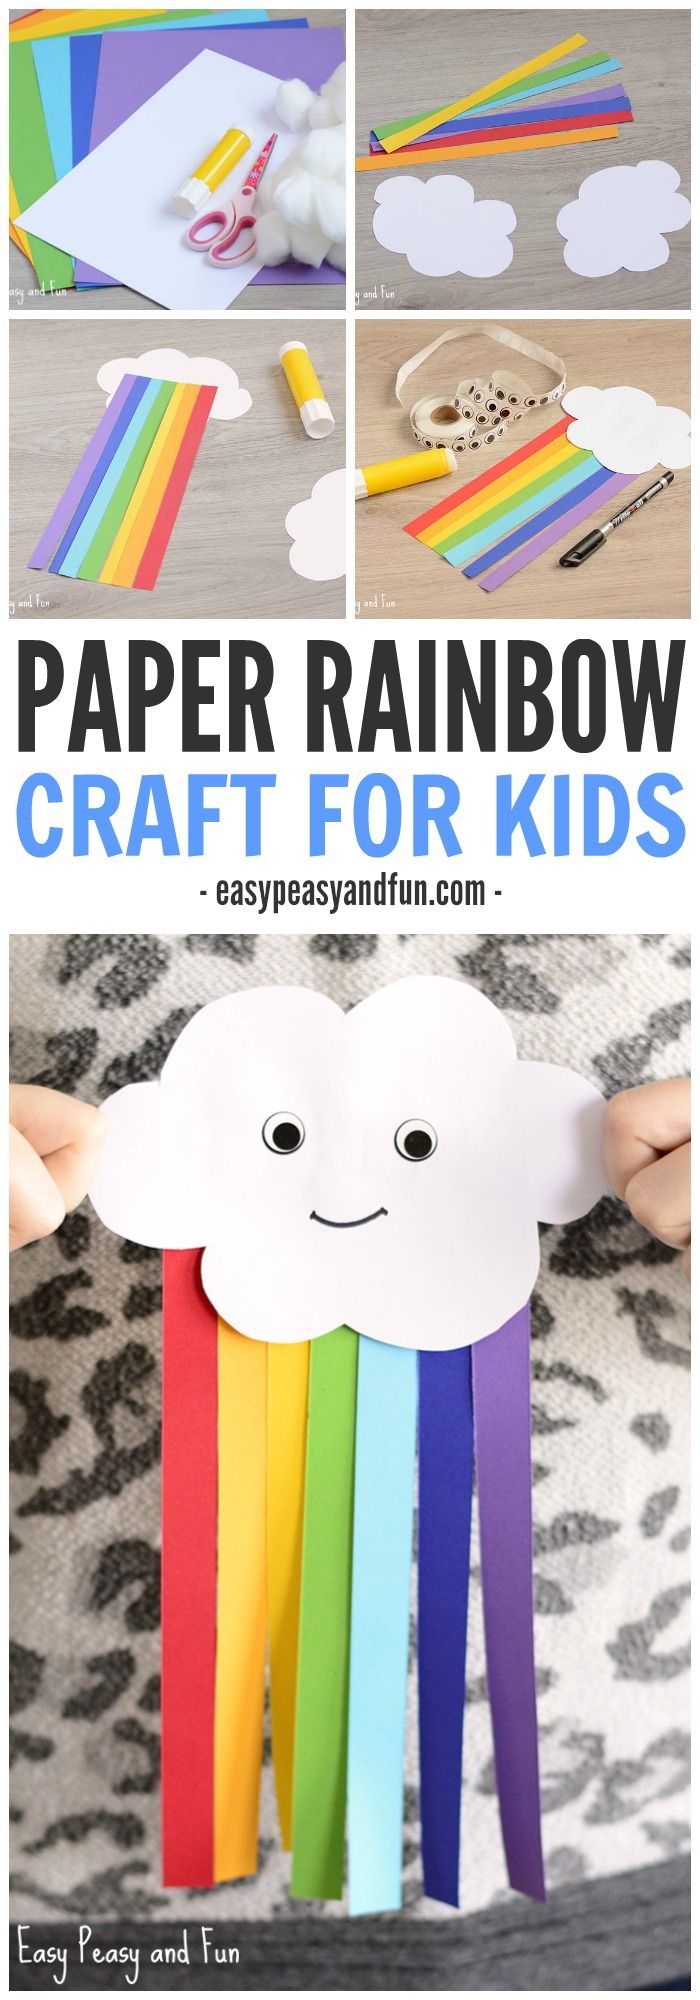 Mr. Happy cloud is here to play! This sweet cloud and paper rainbow craft for kids is a great spring project!